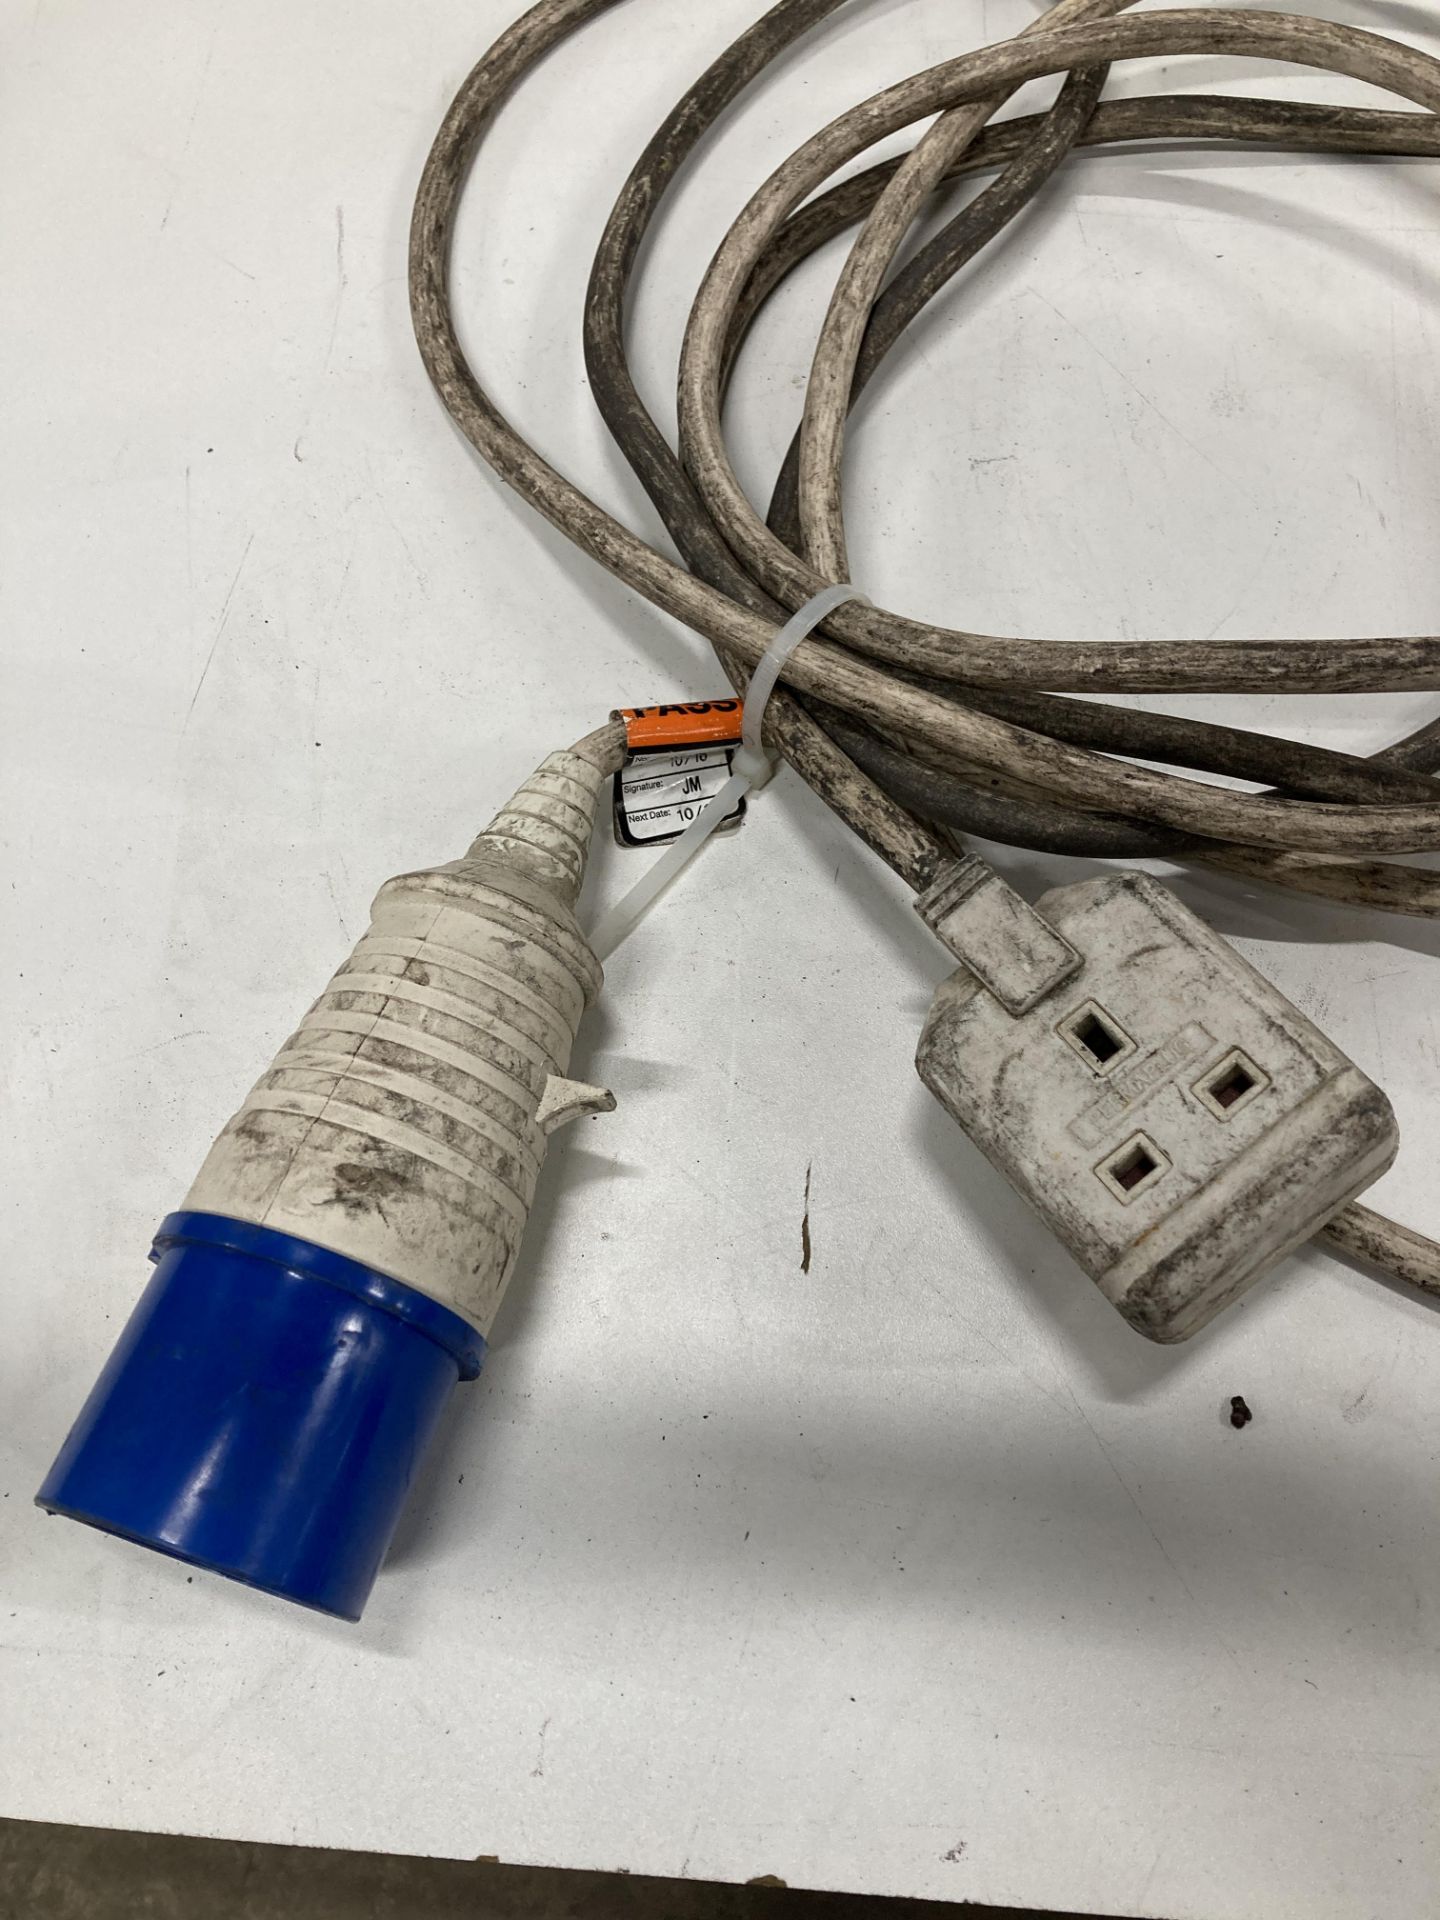 4 x Various 240v Extension/Adaptor Cables - As Pictured - Image 10 of 10